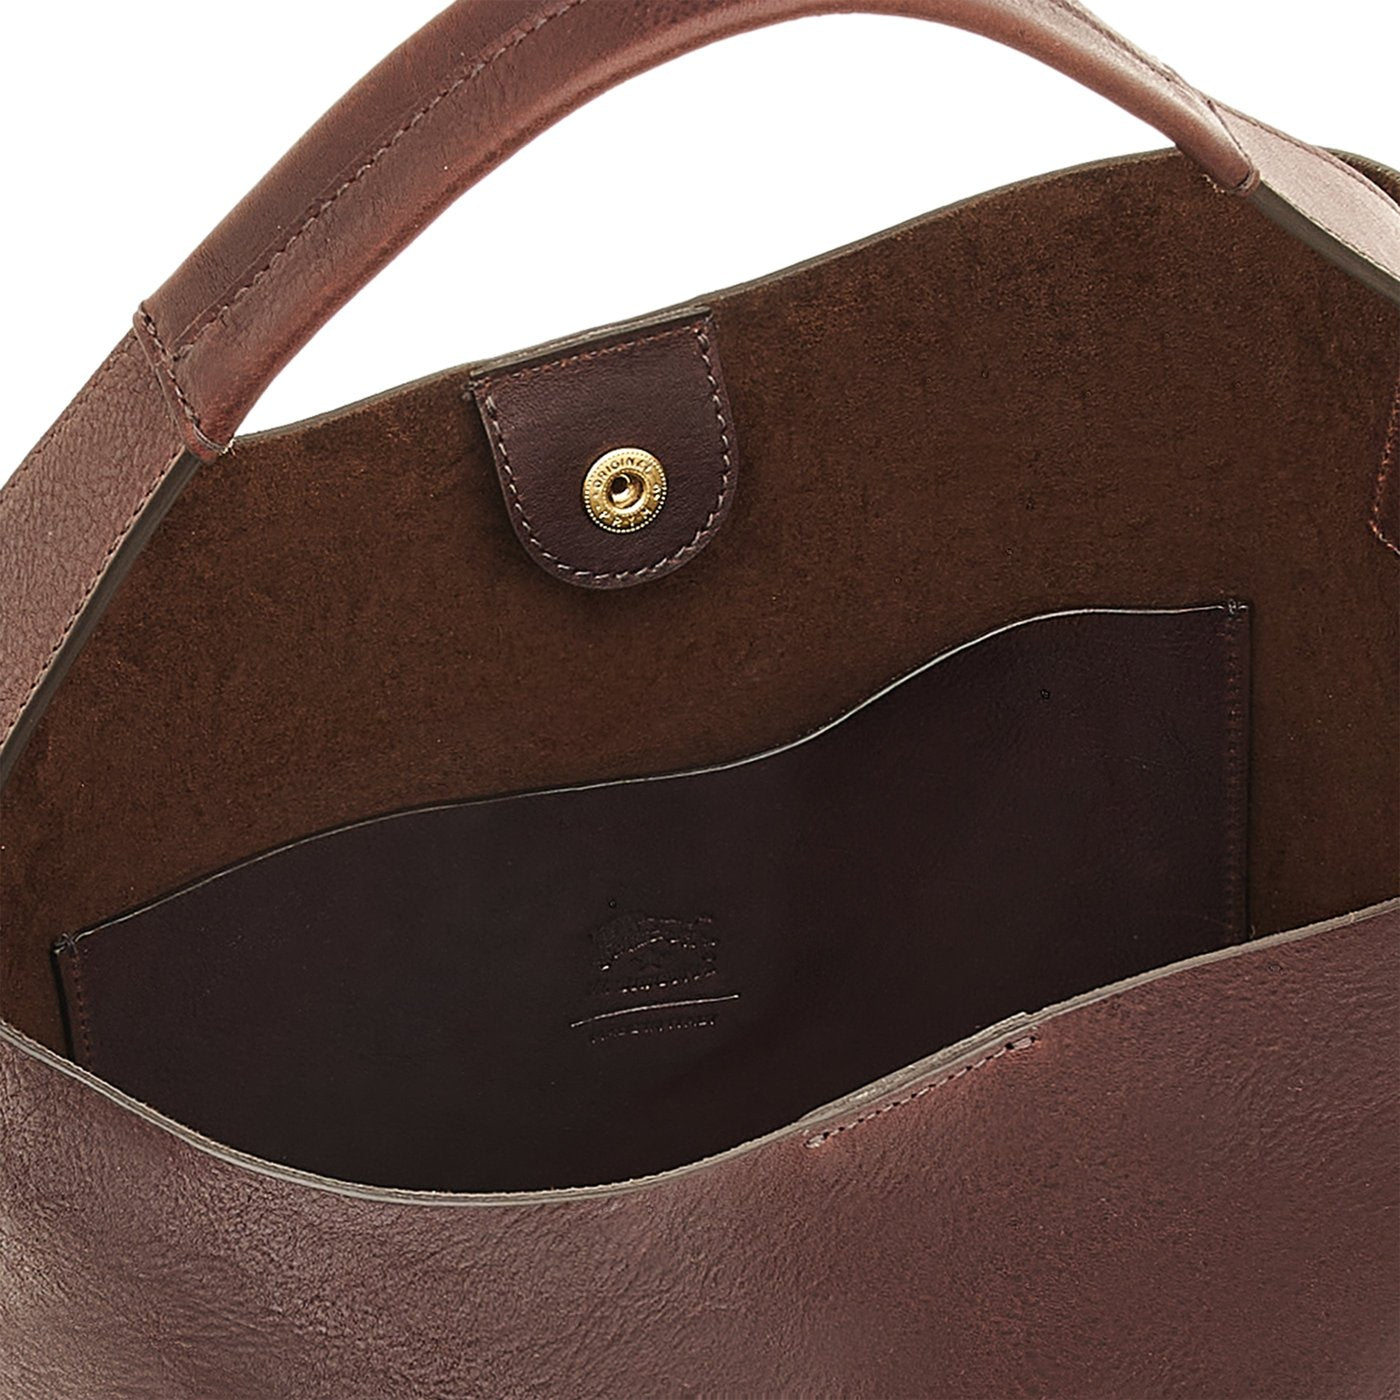 Le laudi | Women's bucket bag in vintage leather color coffee